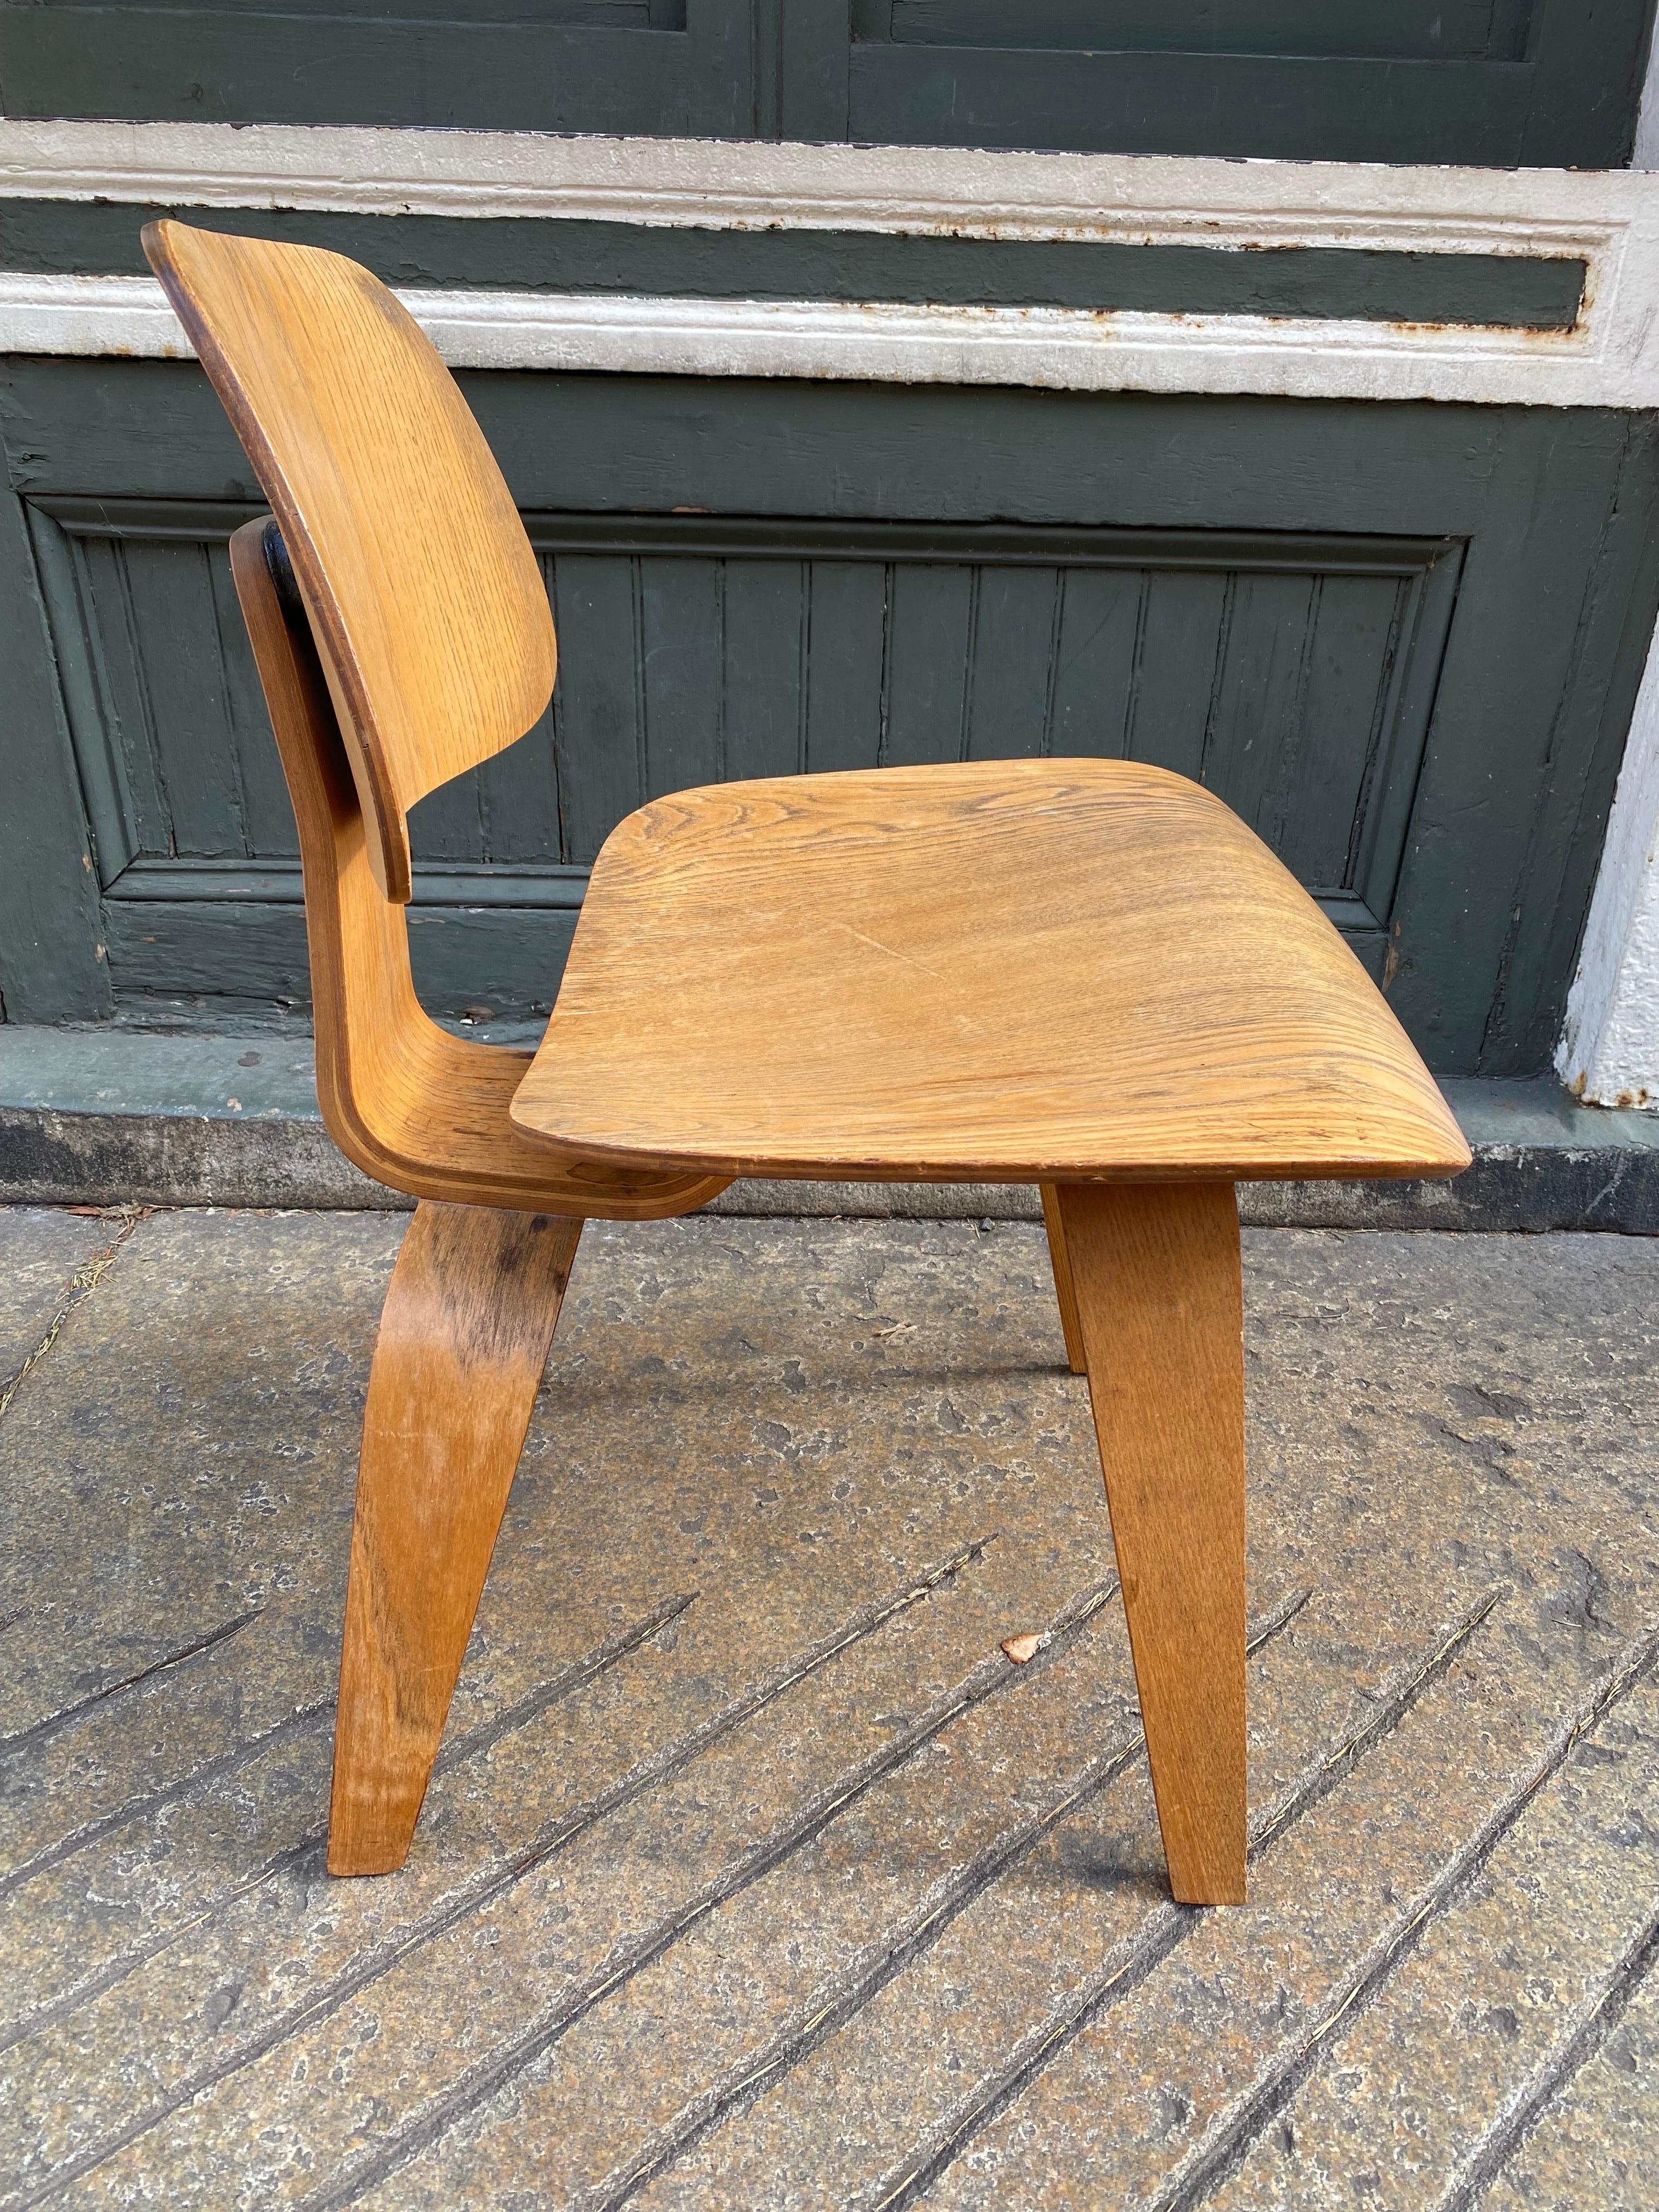 Eames for Herman Miller Ash DCW. Bought from the original owners! Chair presents well with glue showing on back where seat back was reattached at some point. Wood is nice with no veneer damage! Wood shows normal wear from use. Overall clean example!